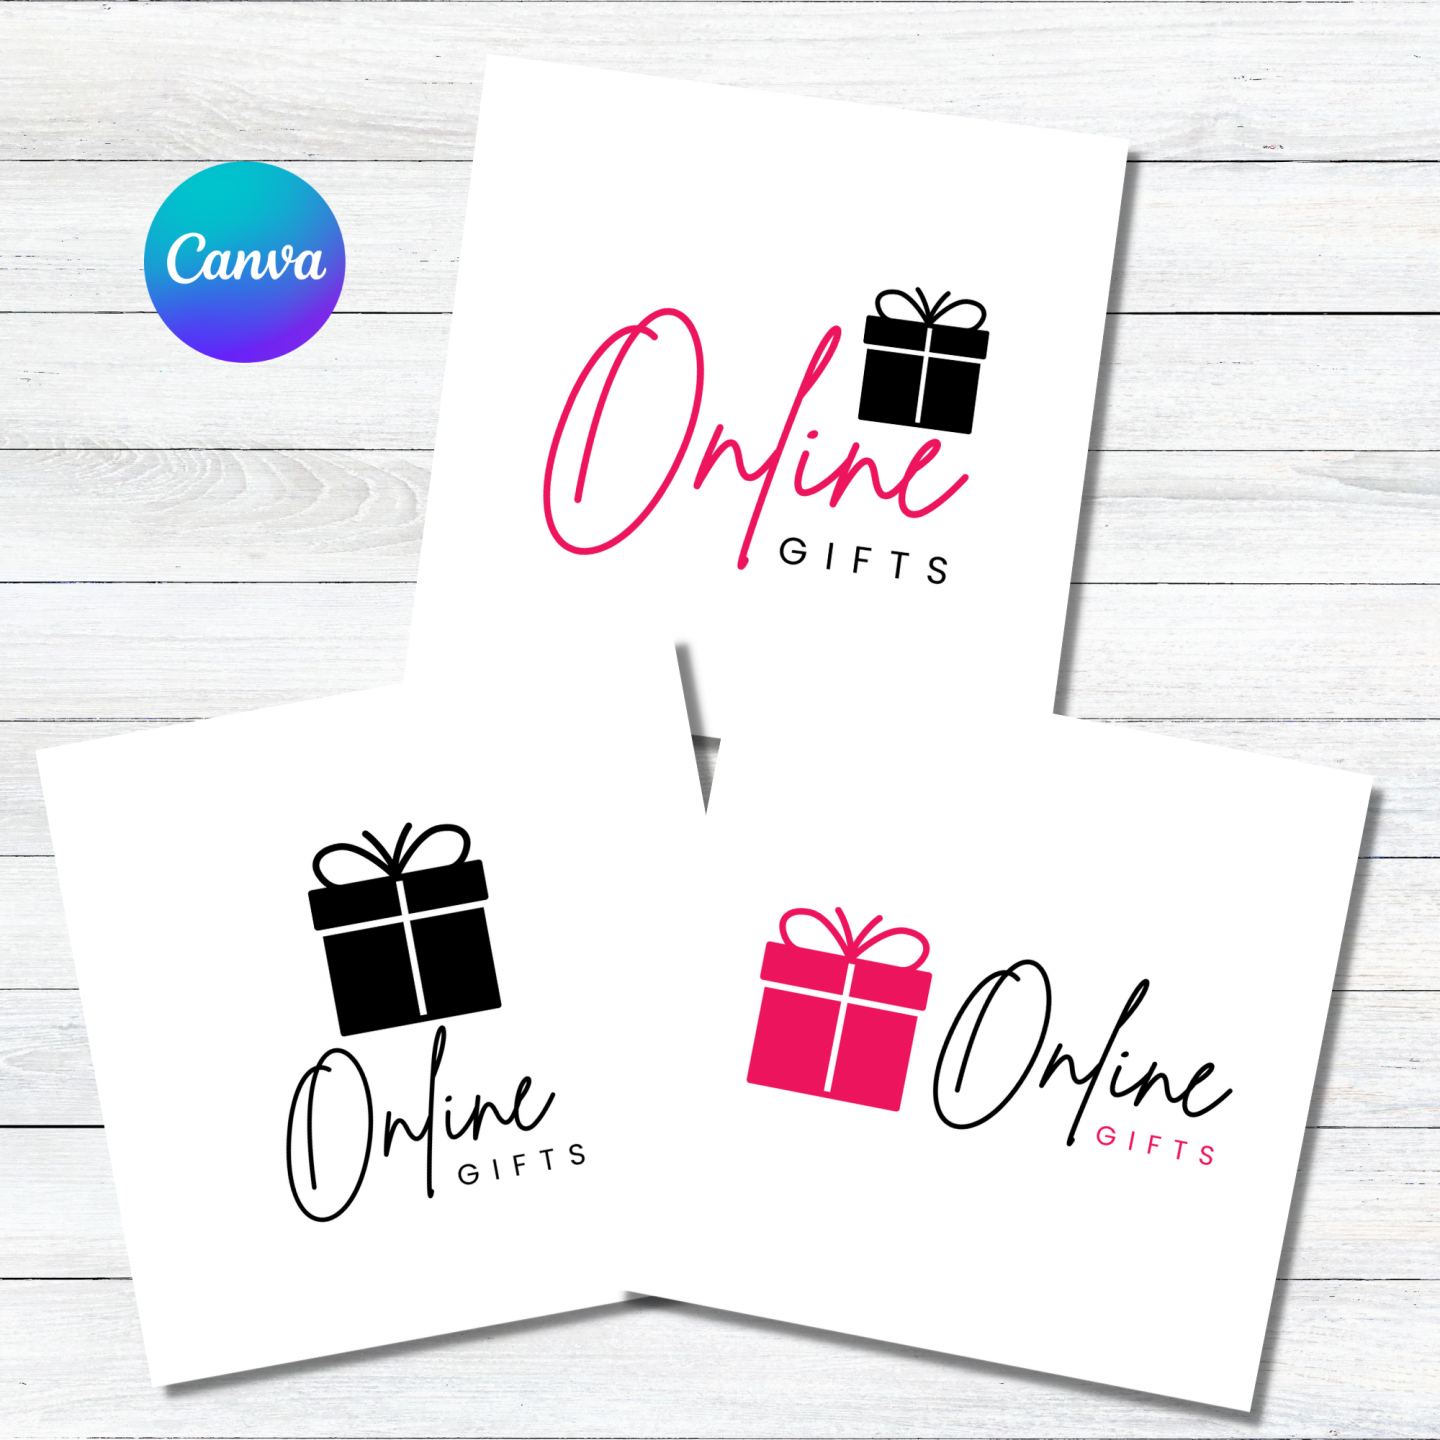 Gift shop logo template, editable in Canva.